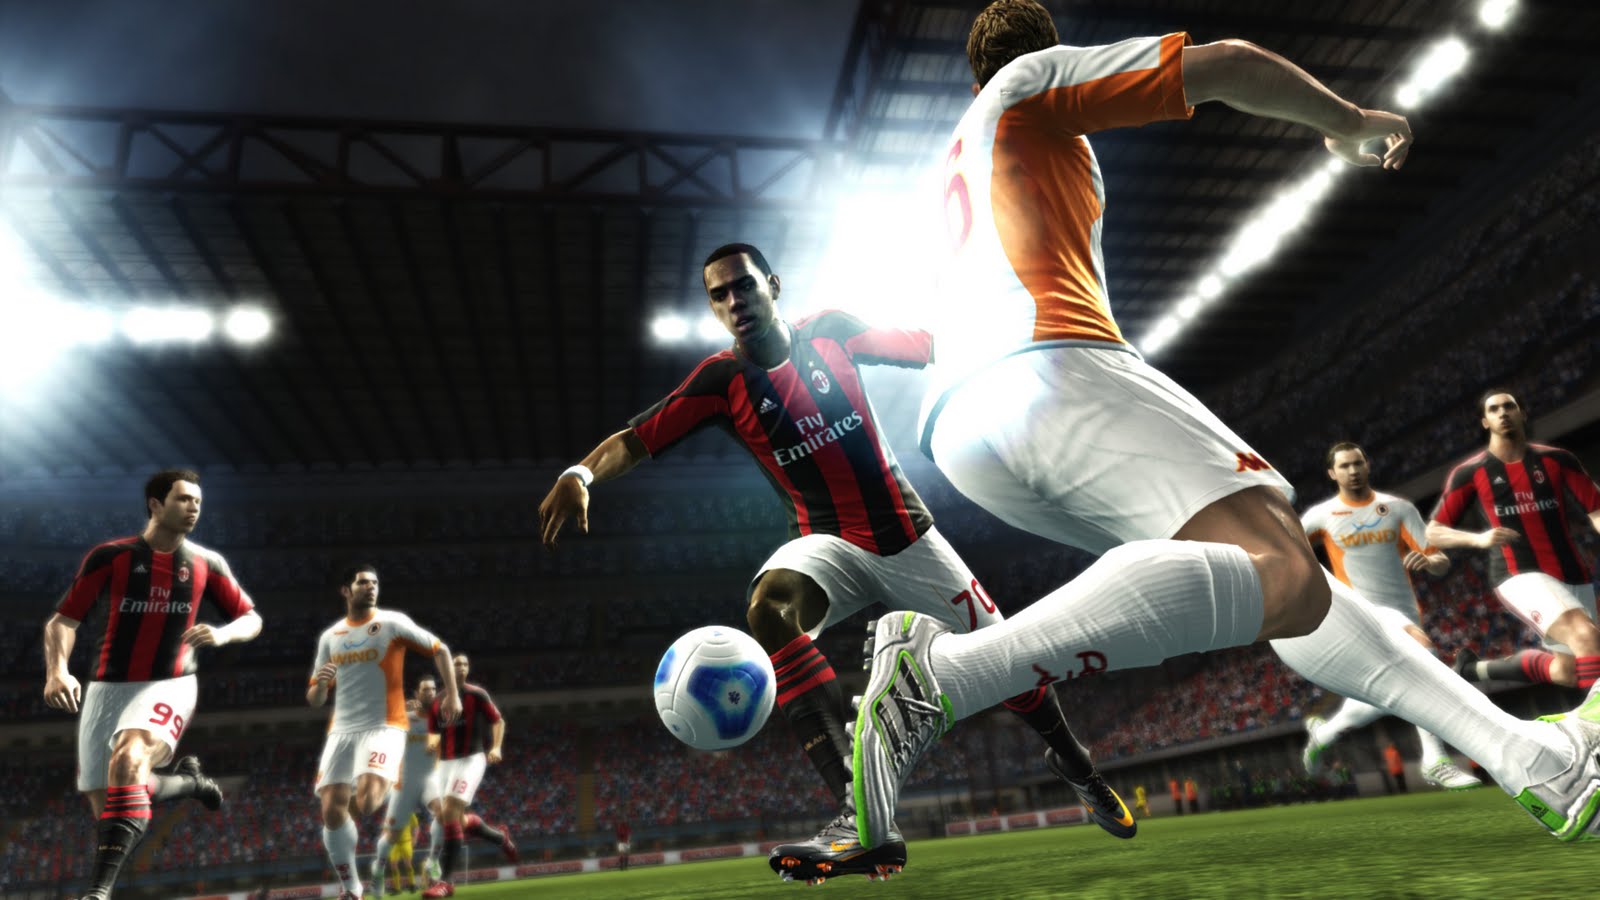 &#9679;&#9679; (PS3/XBOX360) Pro Evolution Soccer 2012 - Kaskus Official Thread &#9679;&#9679;